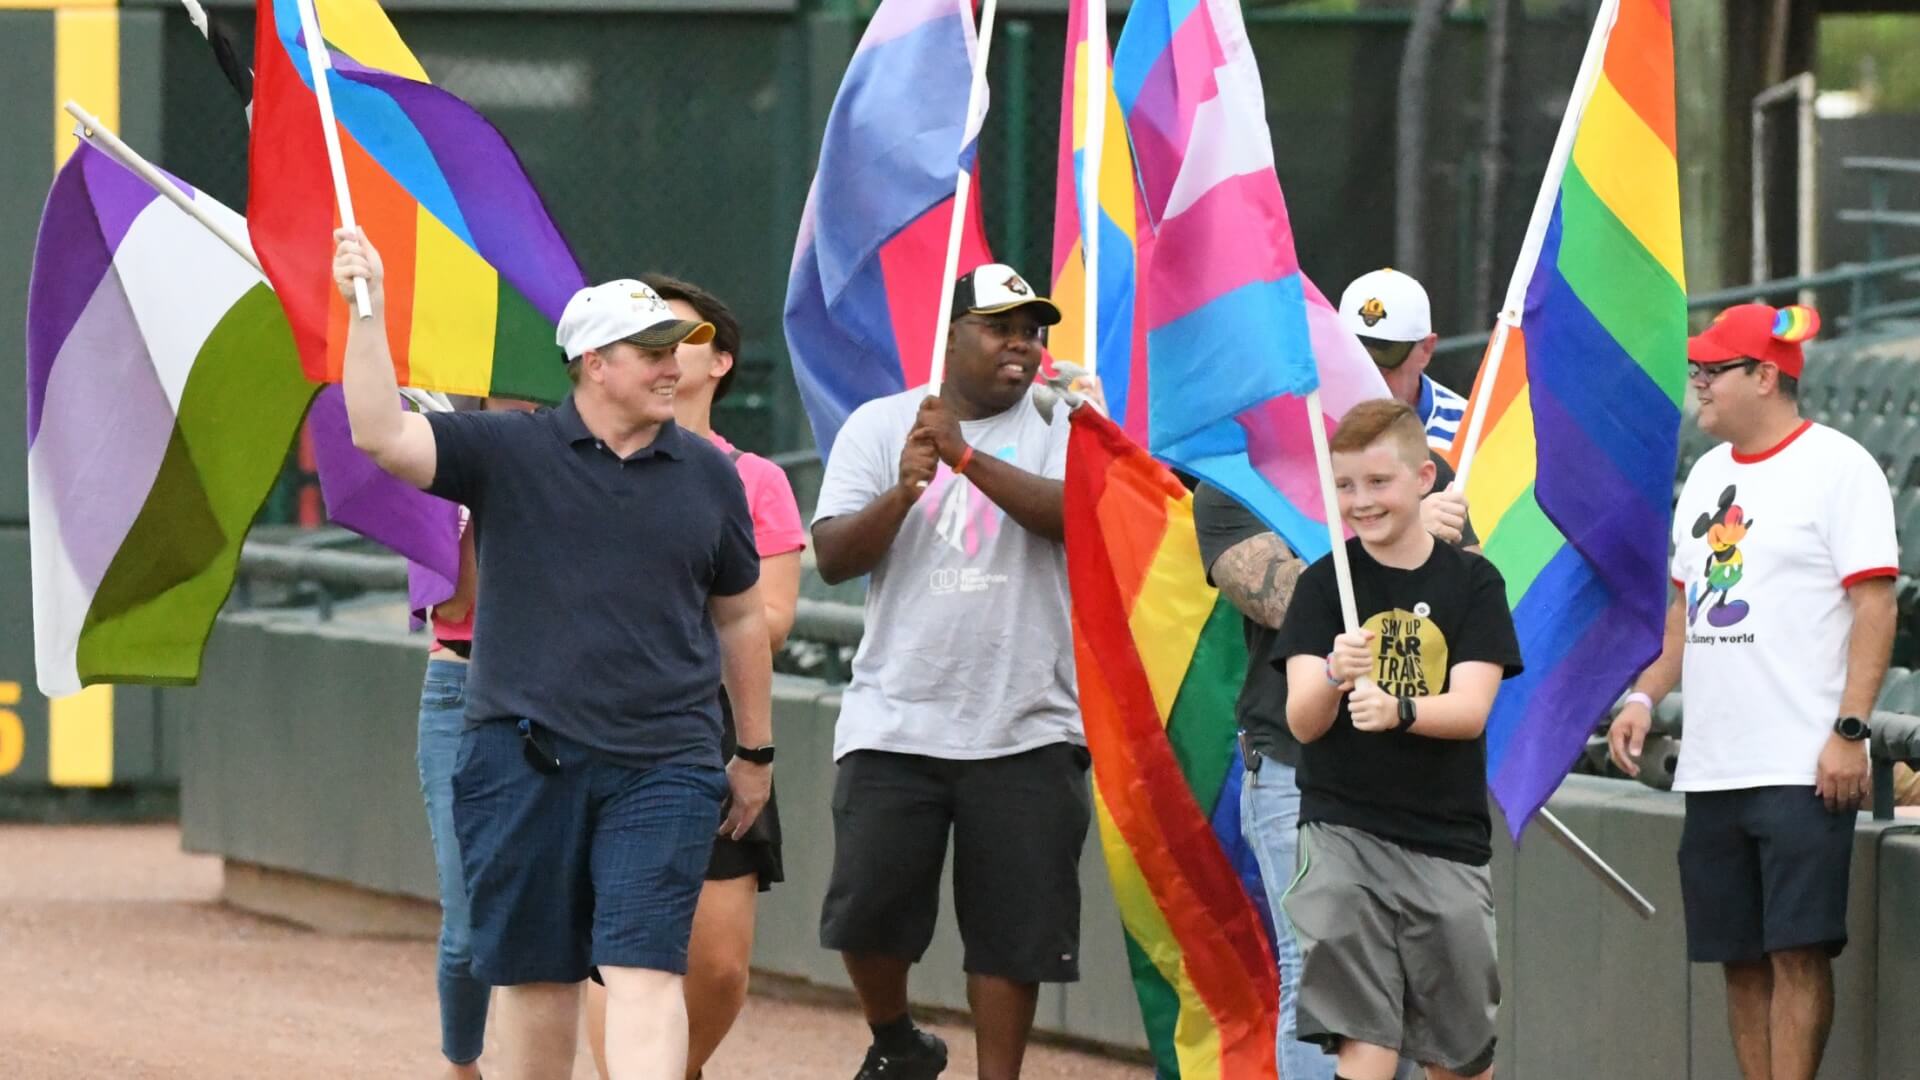 fans at a bradenton marauders game holding various pride flags